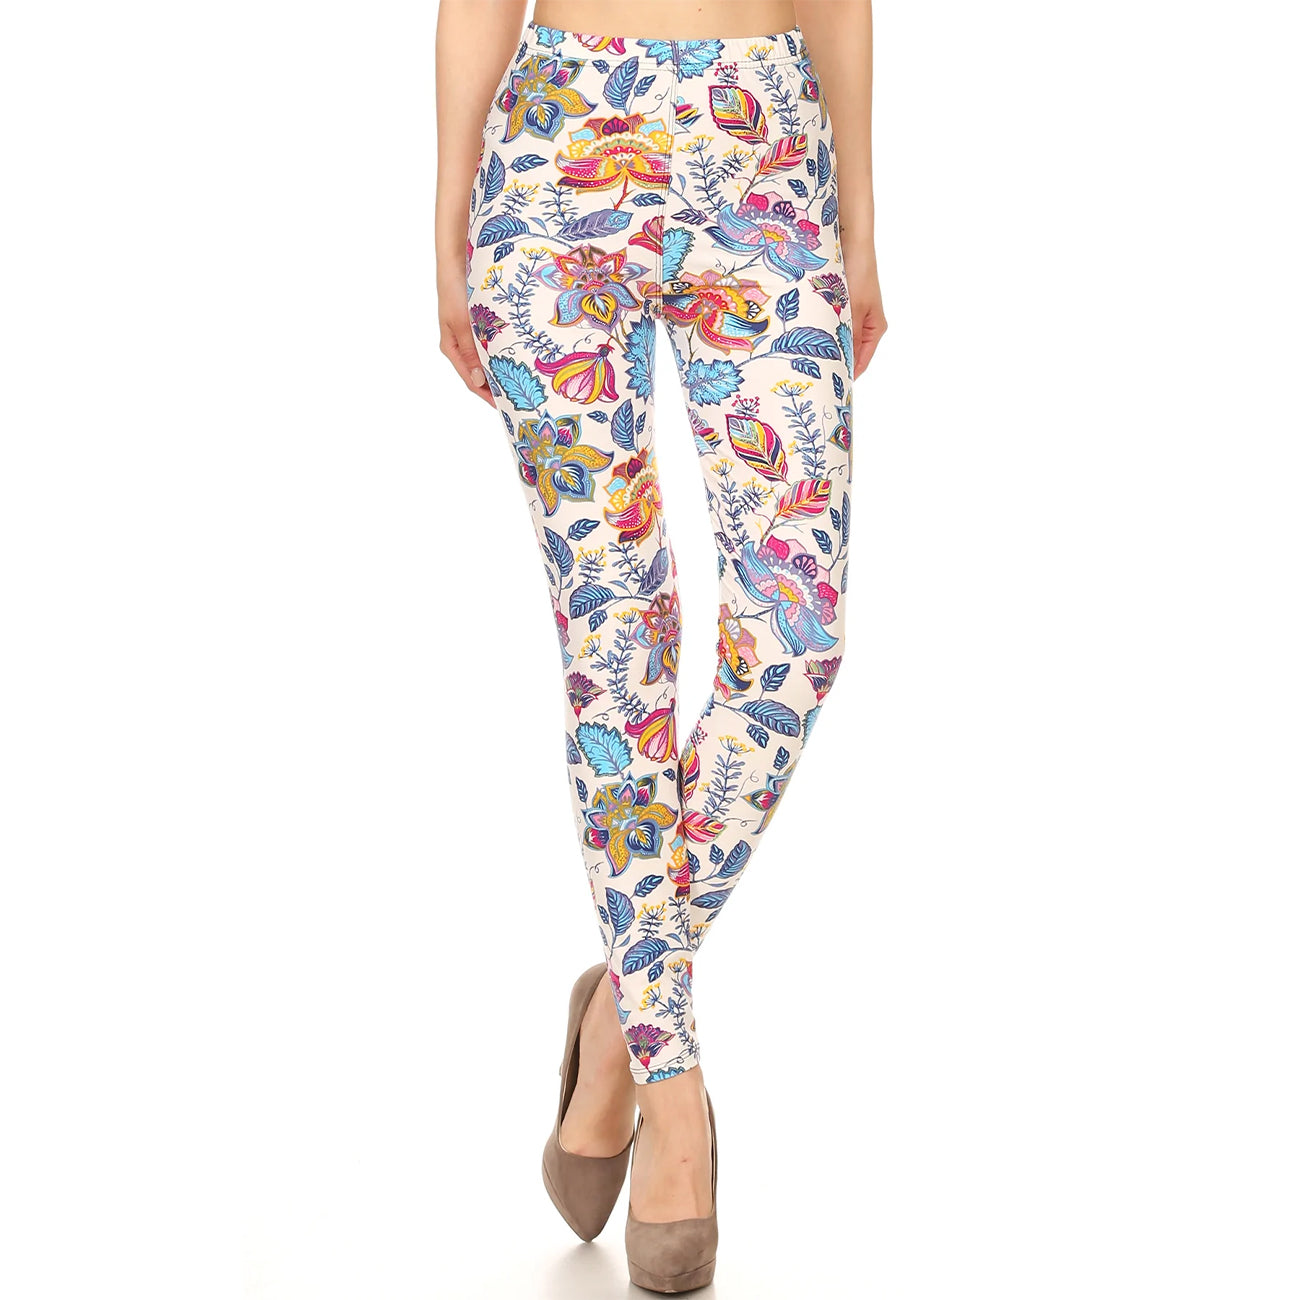 Floral Printed Lined Women's Knit Legging